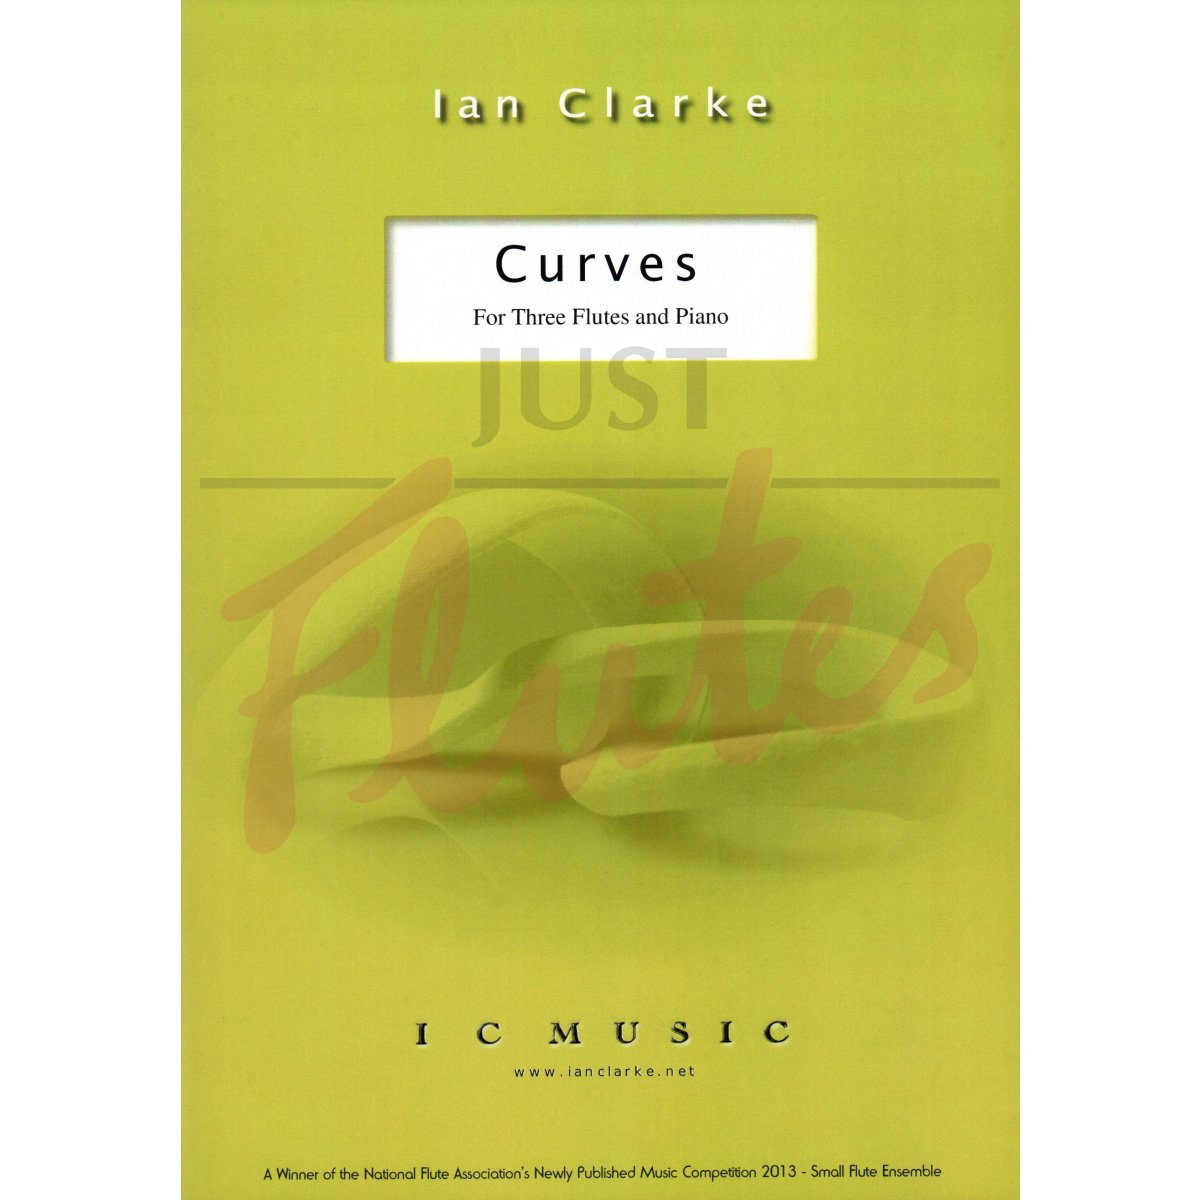 Curves for Three Flutes and Piano